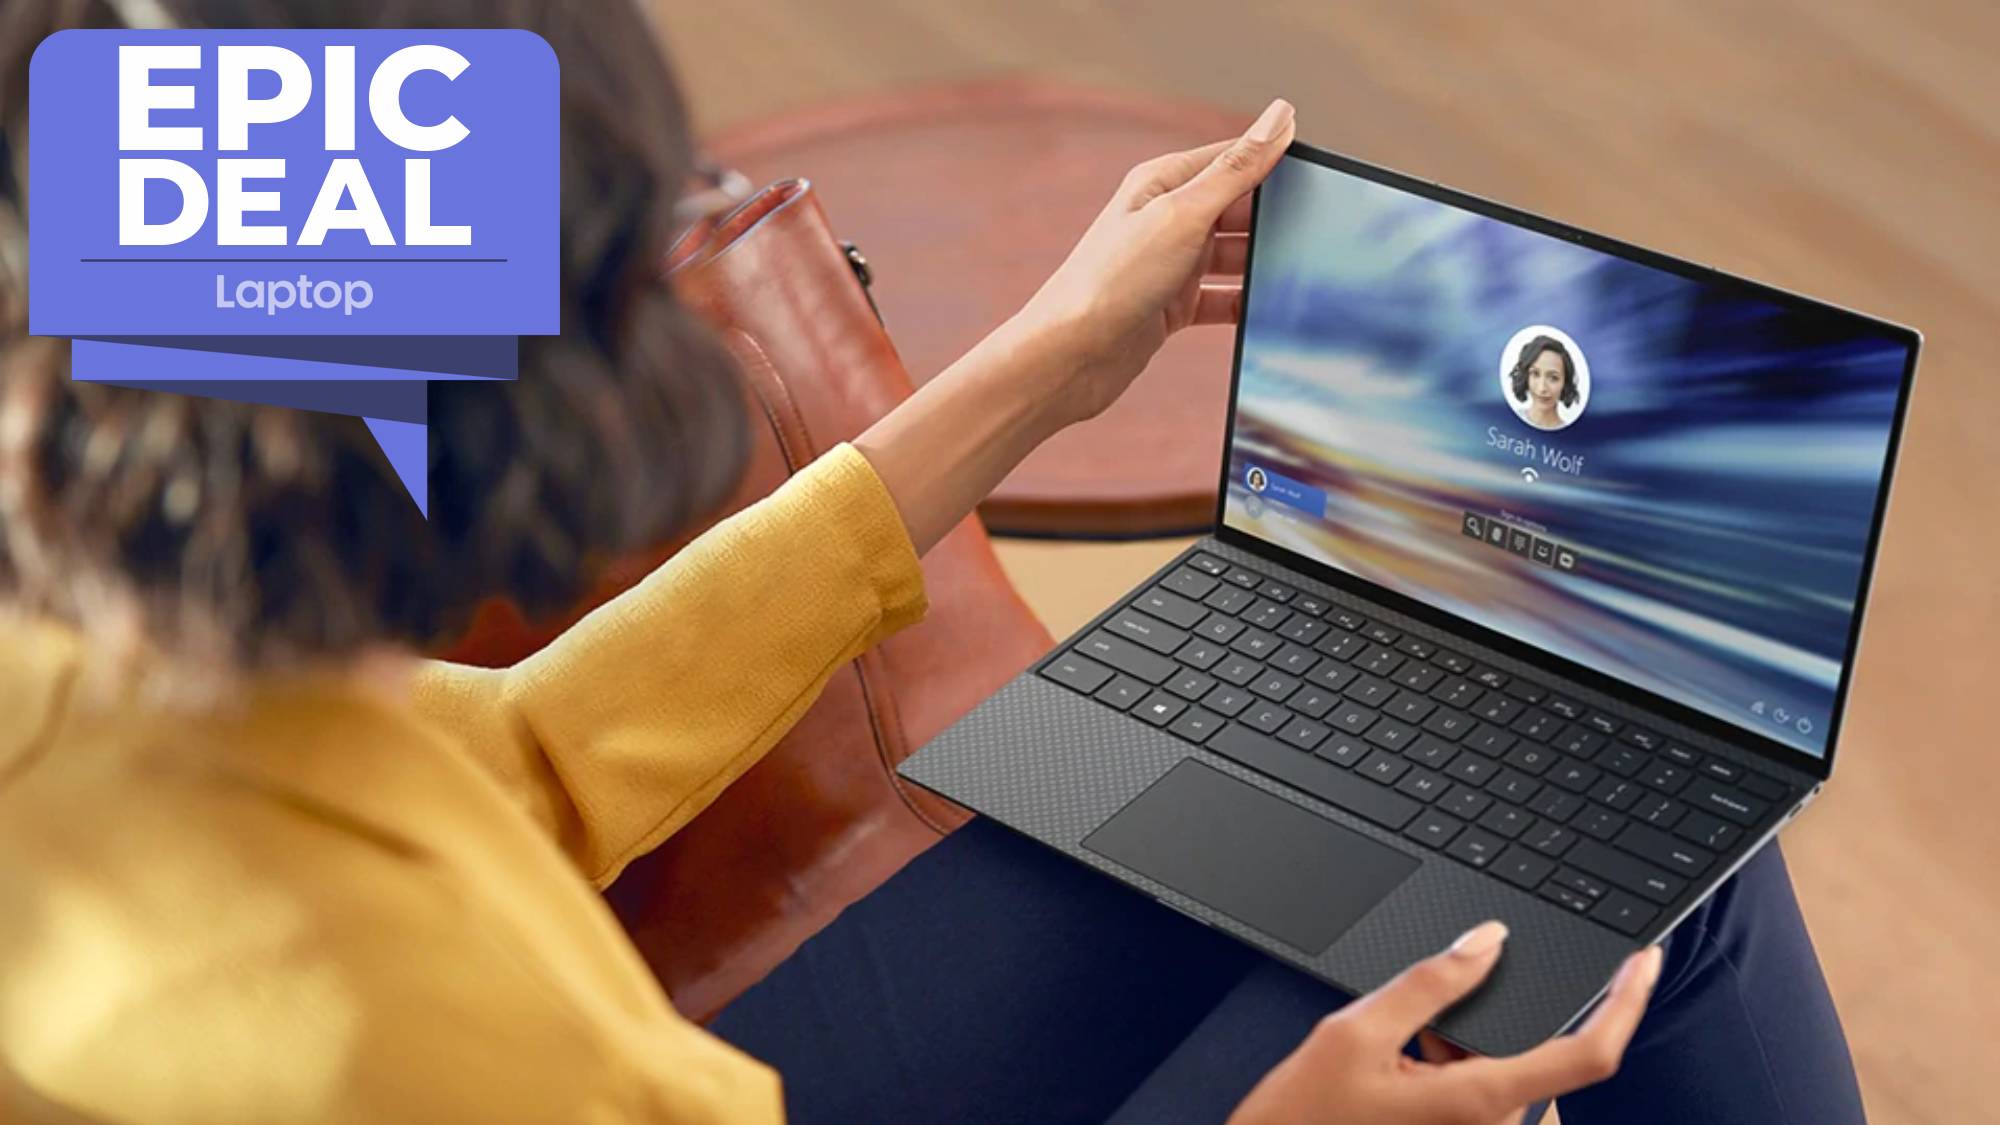 Dell XPS 13 touch laptop with 11th Gen Intel CPU now $200 off via